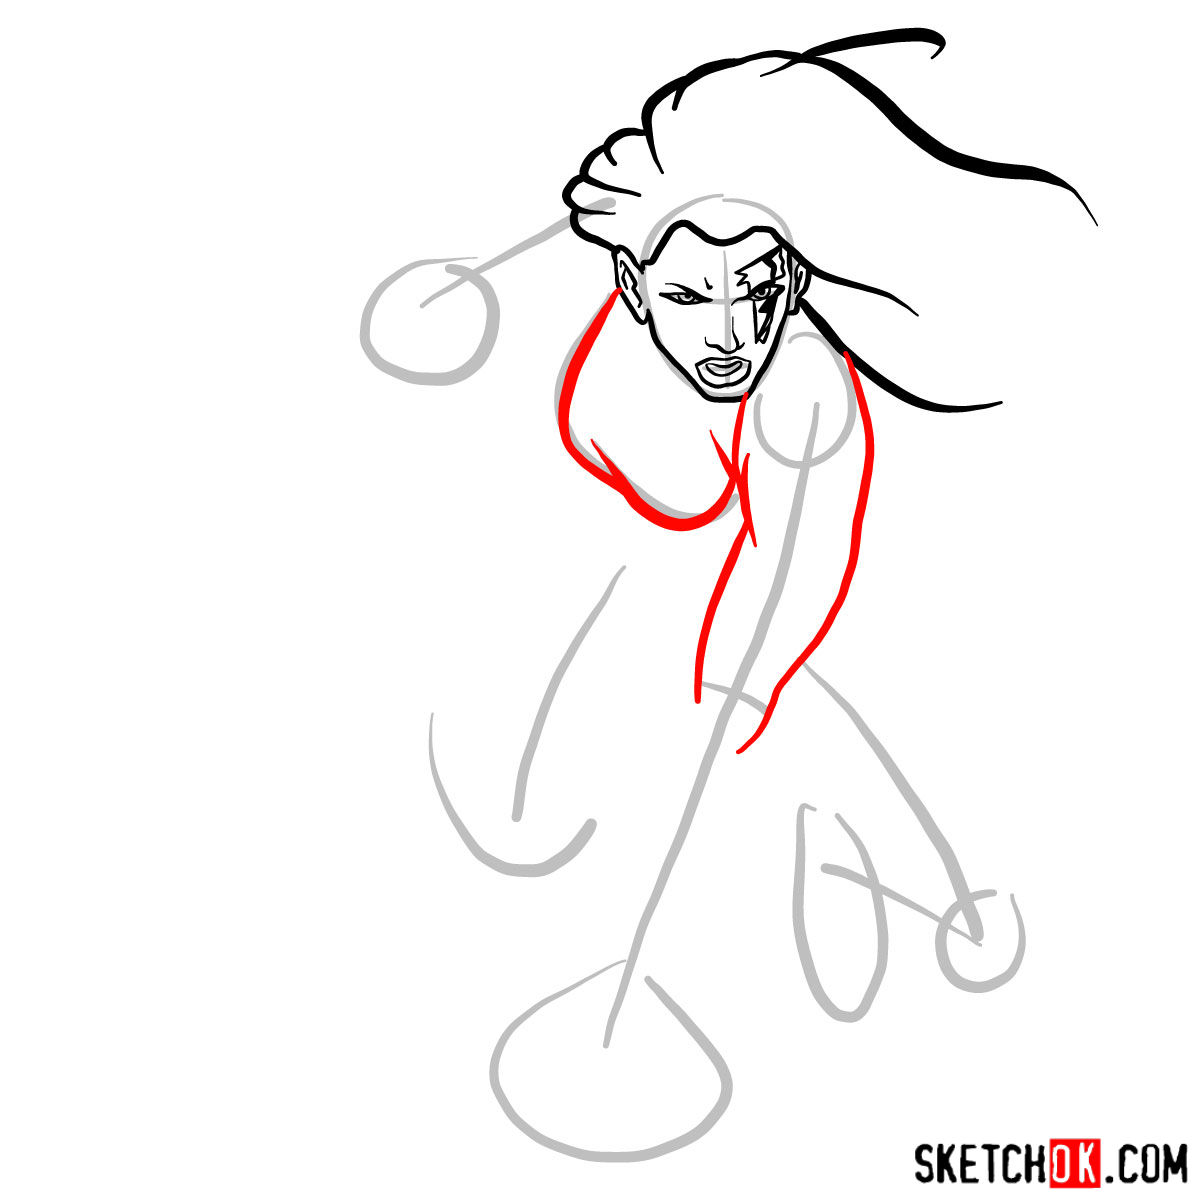 How to draw Psylocke from X-Men - step 05